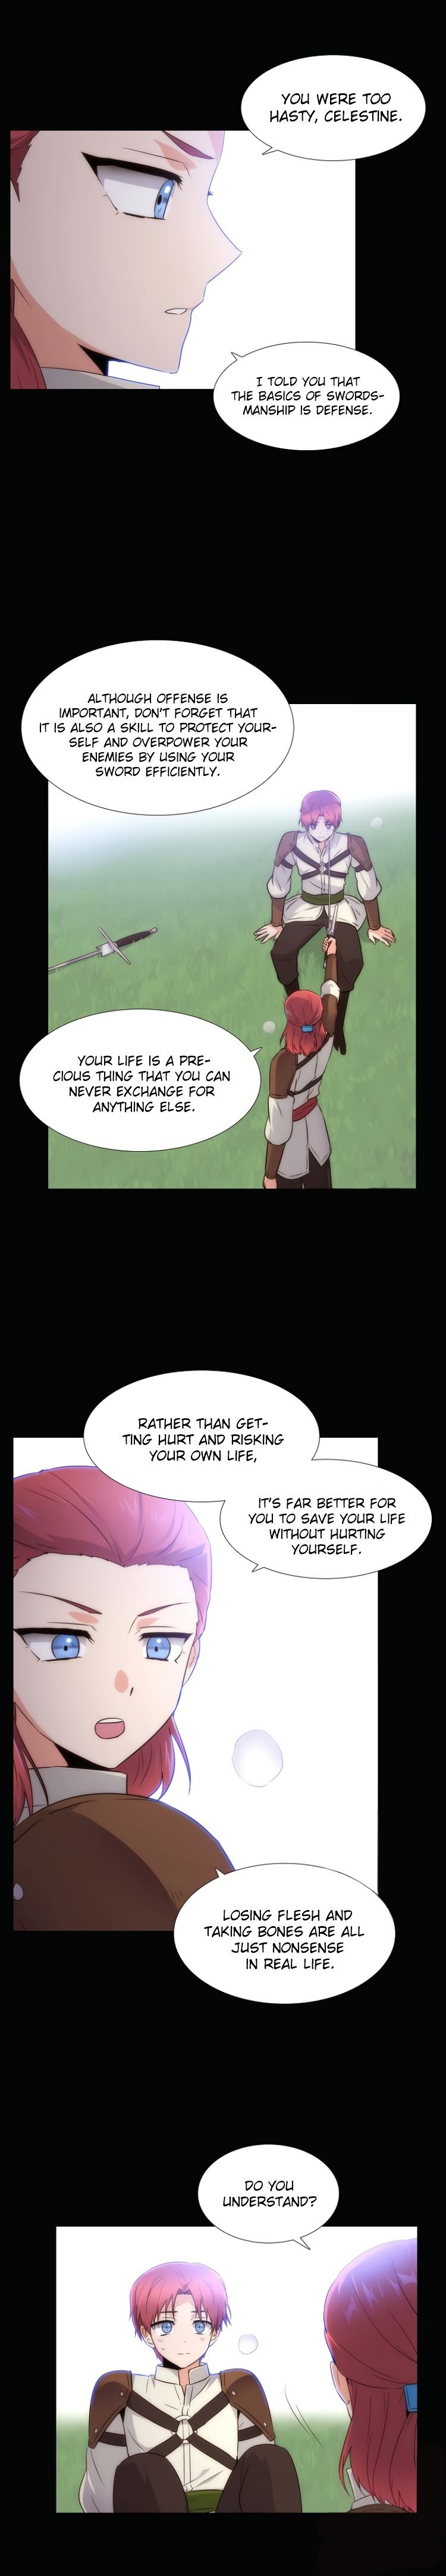 The Villain Discovered My Identity Chapter 10 - Page 1